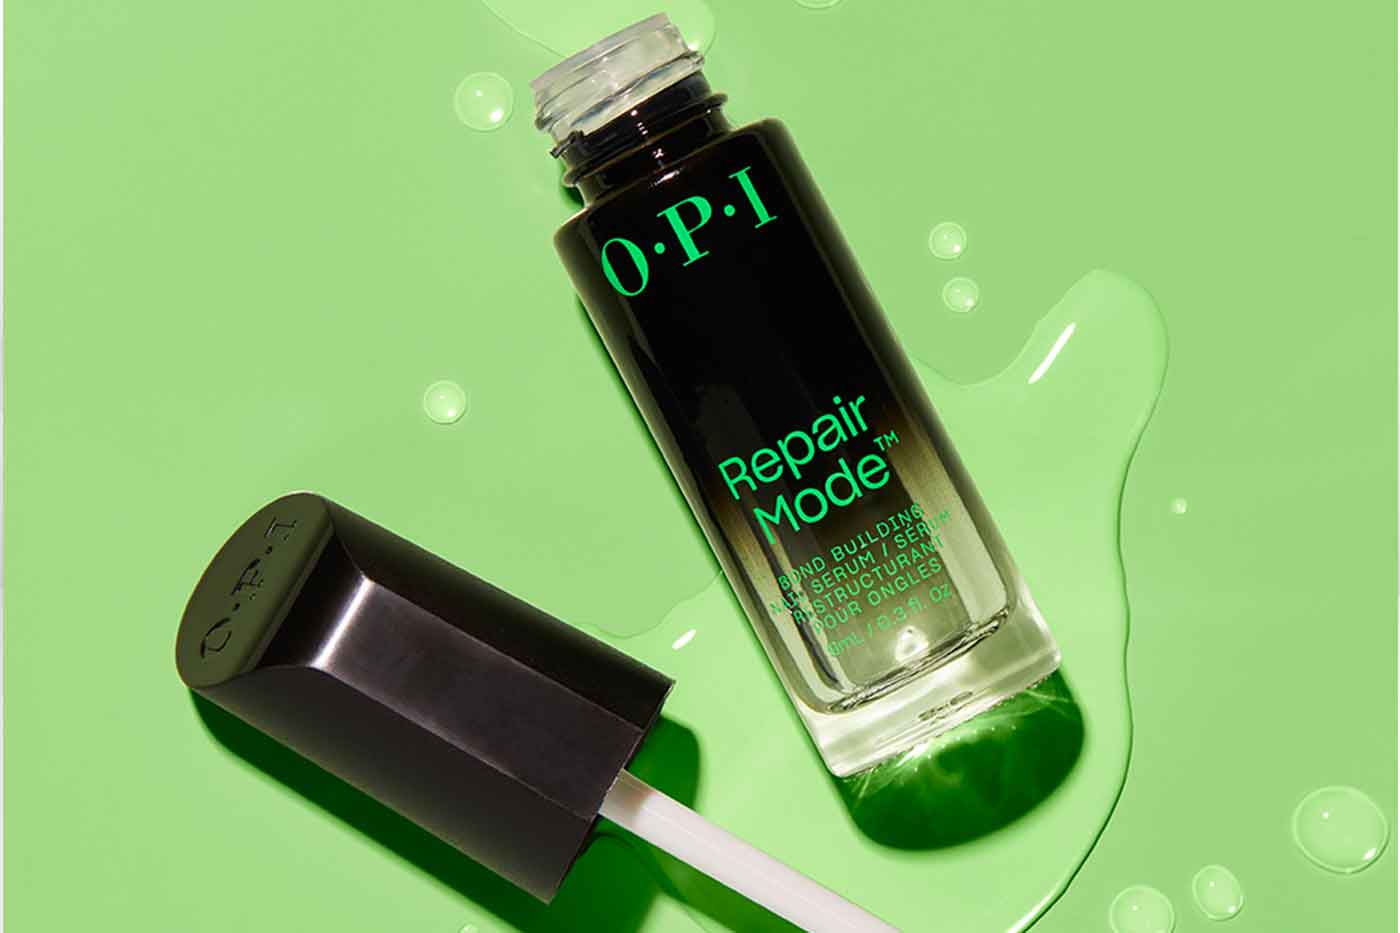 OPI launches first-ever nail bond builder